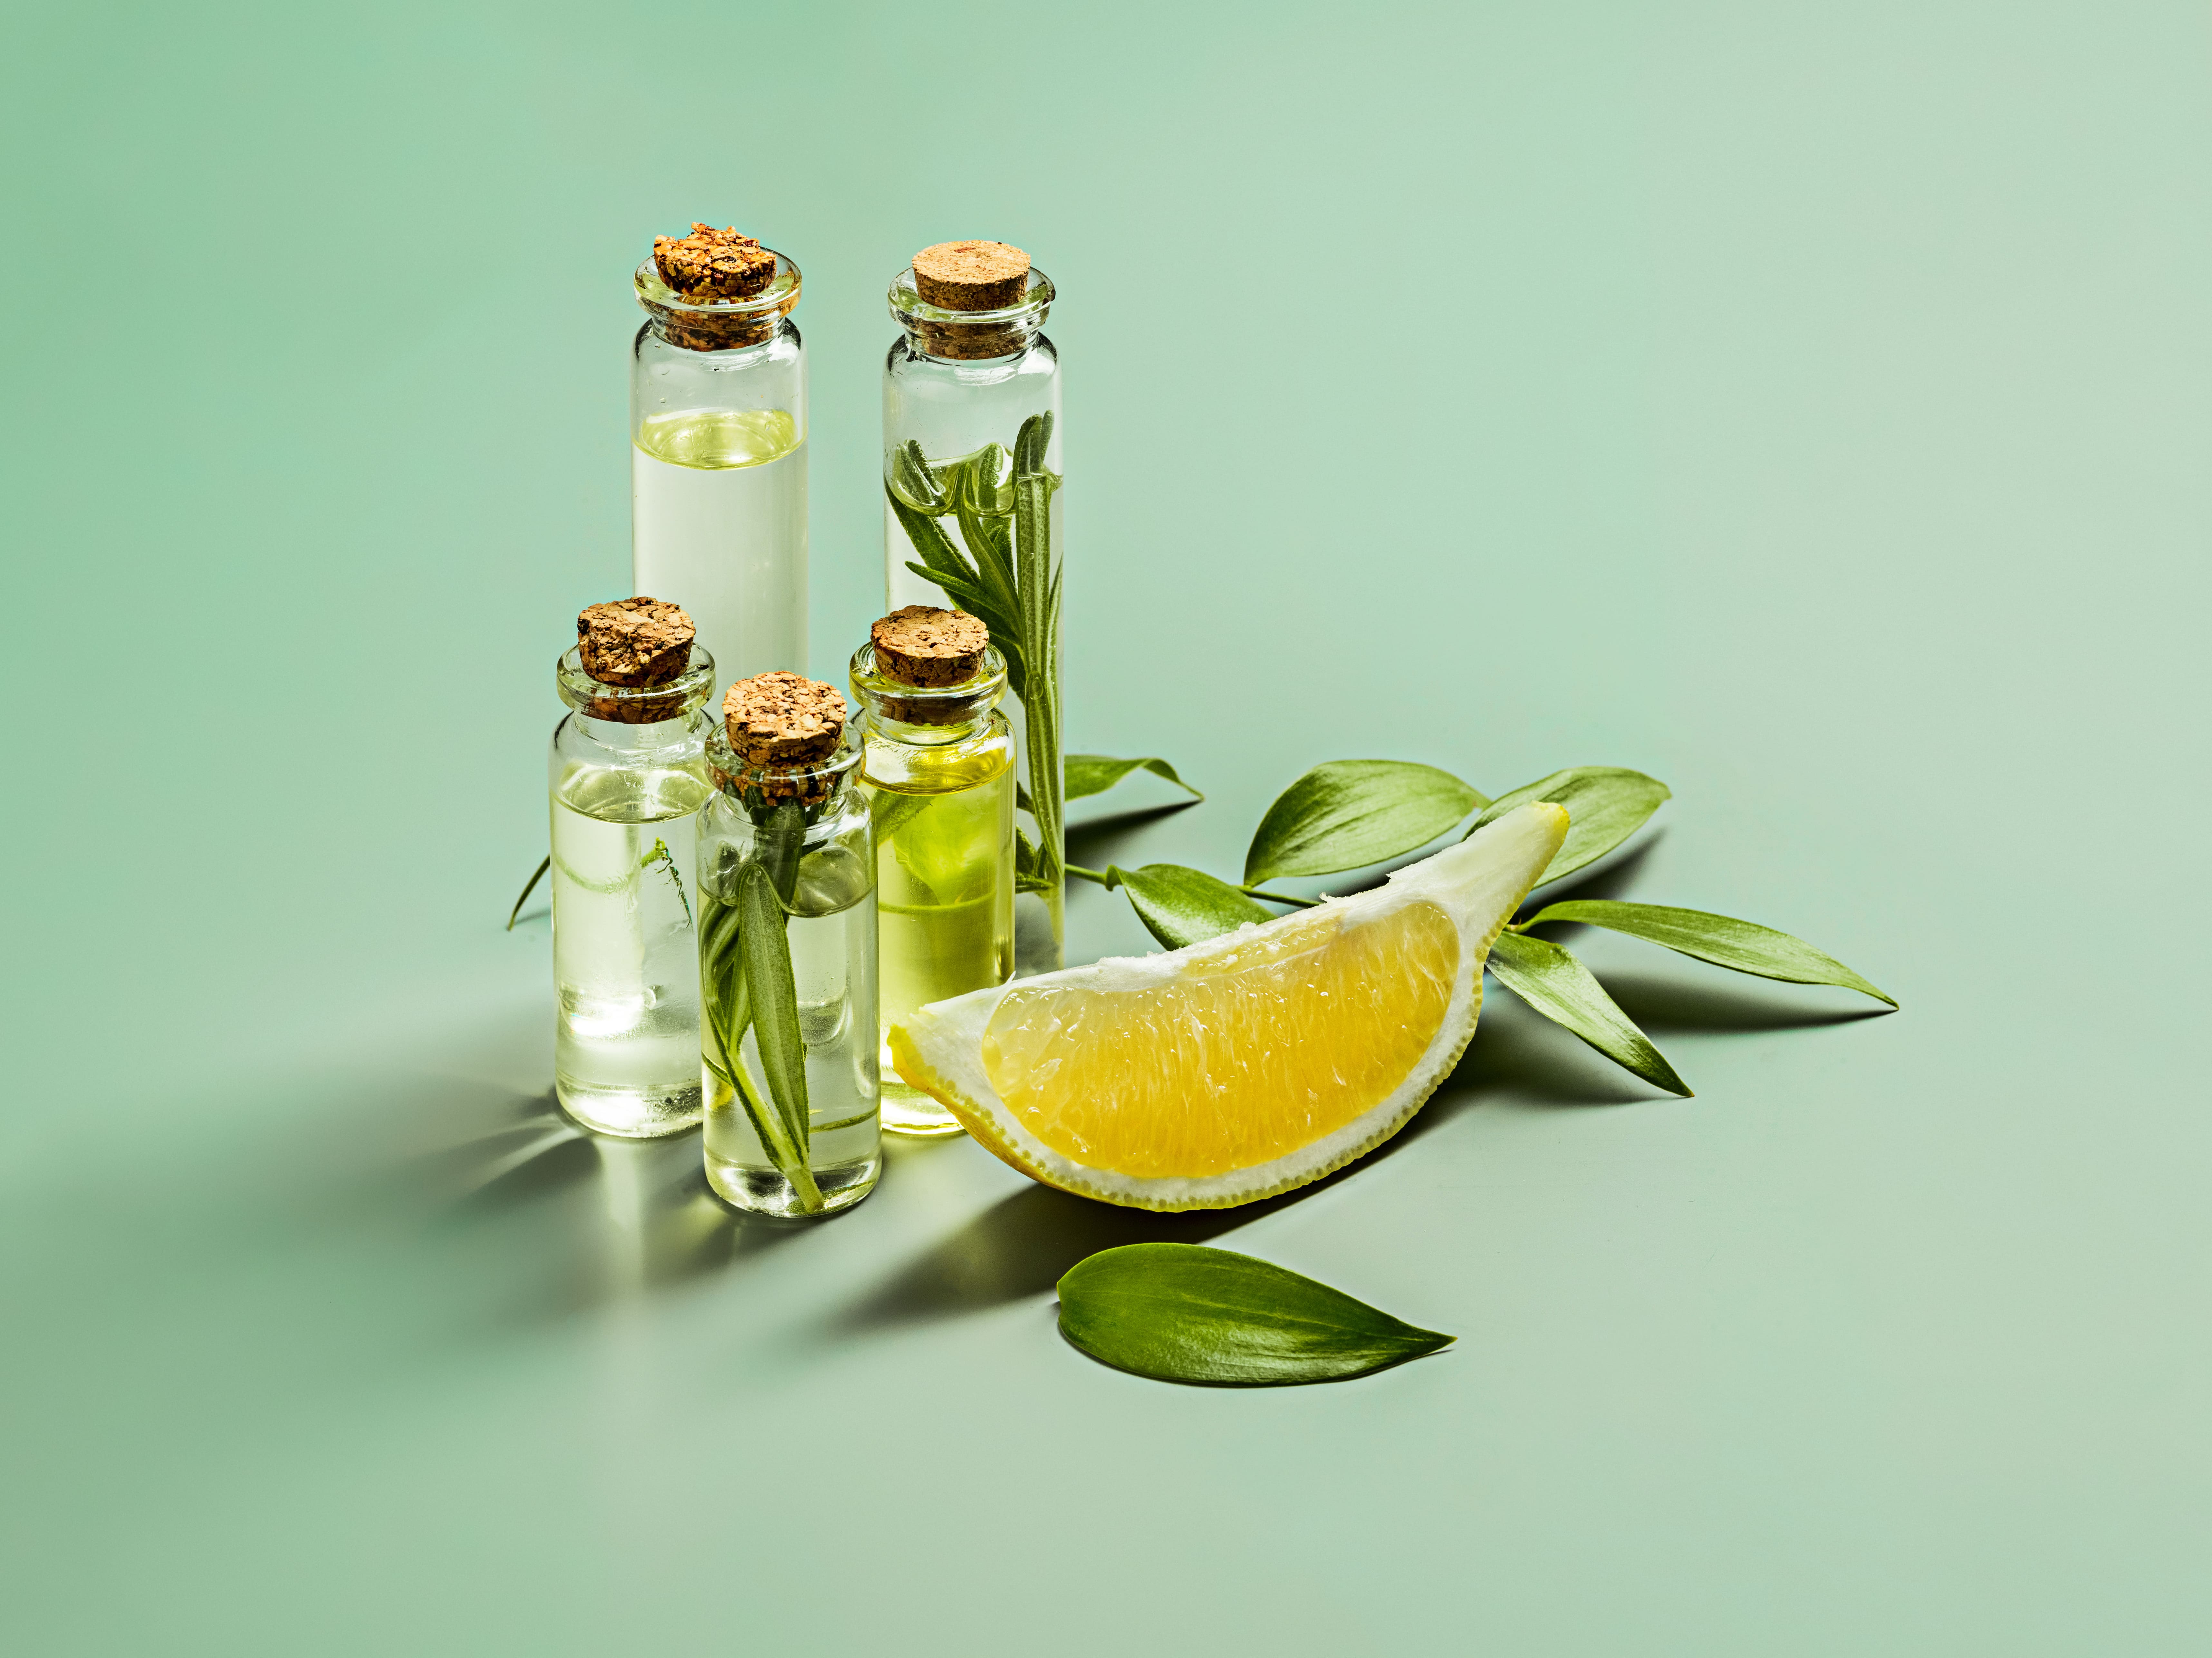 Essential Oil product suppliers in india, Premium Essential Oil suppliers in india, Essential Oil suppliers in india, Aaditya Traders, Essential Oil suppliers